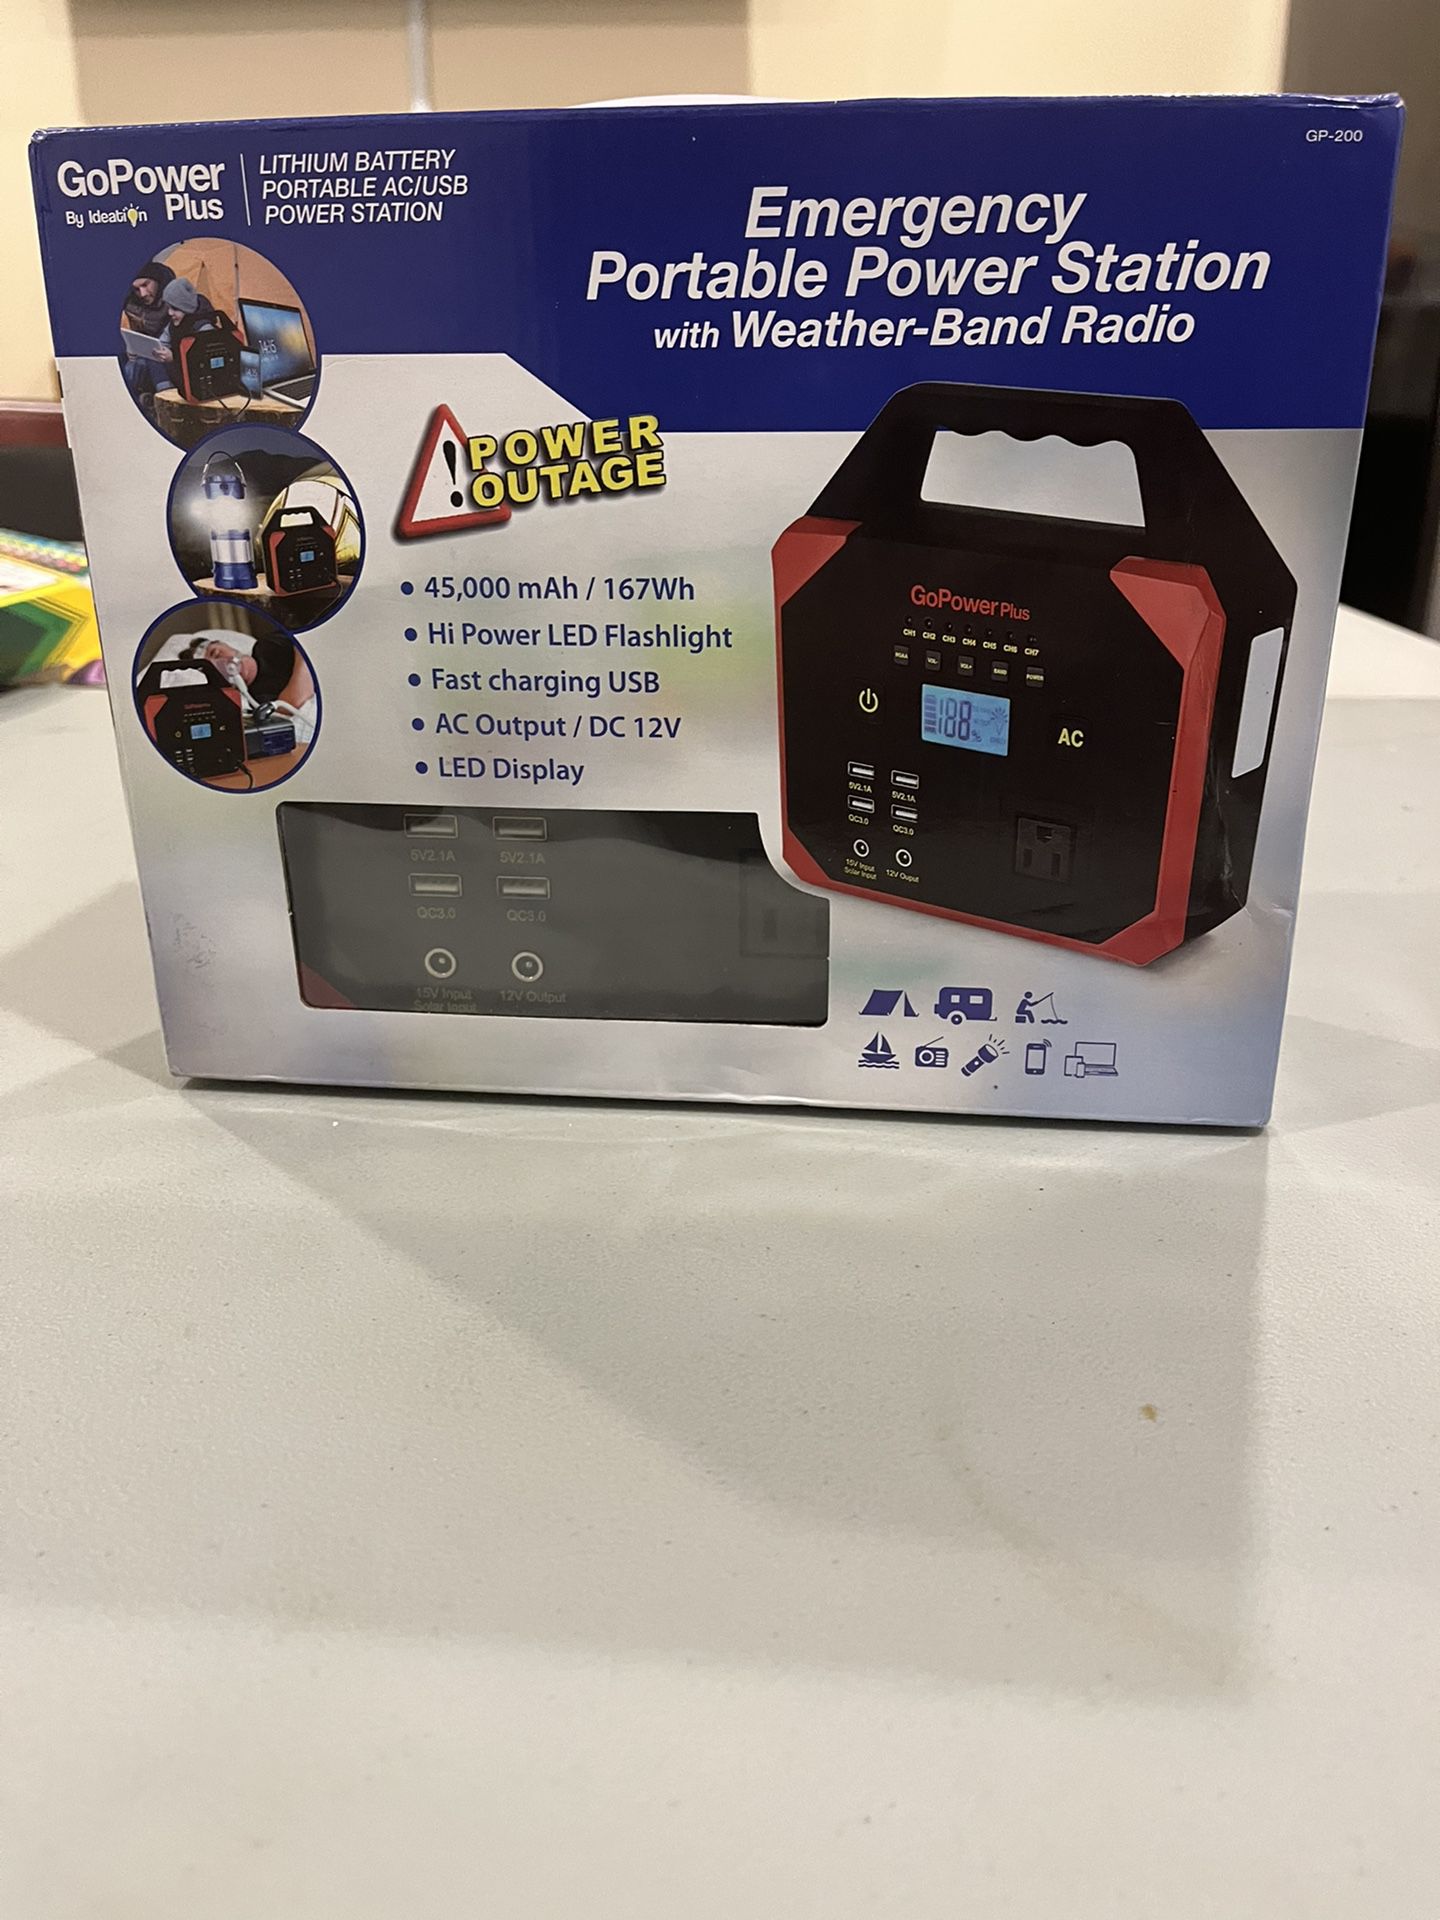 GoPower Plus Emergency Portable Power Station 45,000 mAh  Brand New Never Been Opened $100 In Escondido 